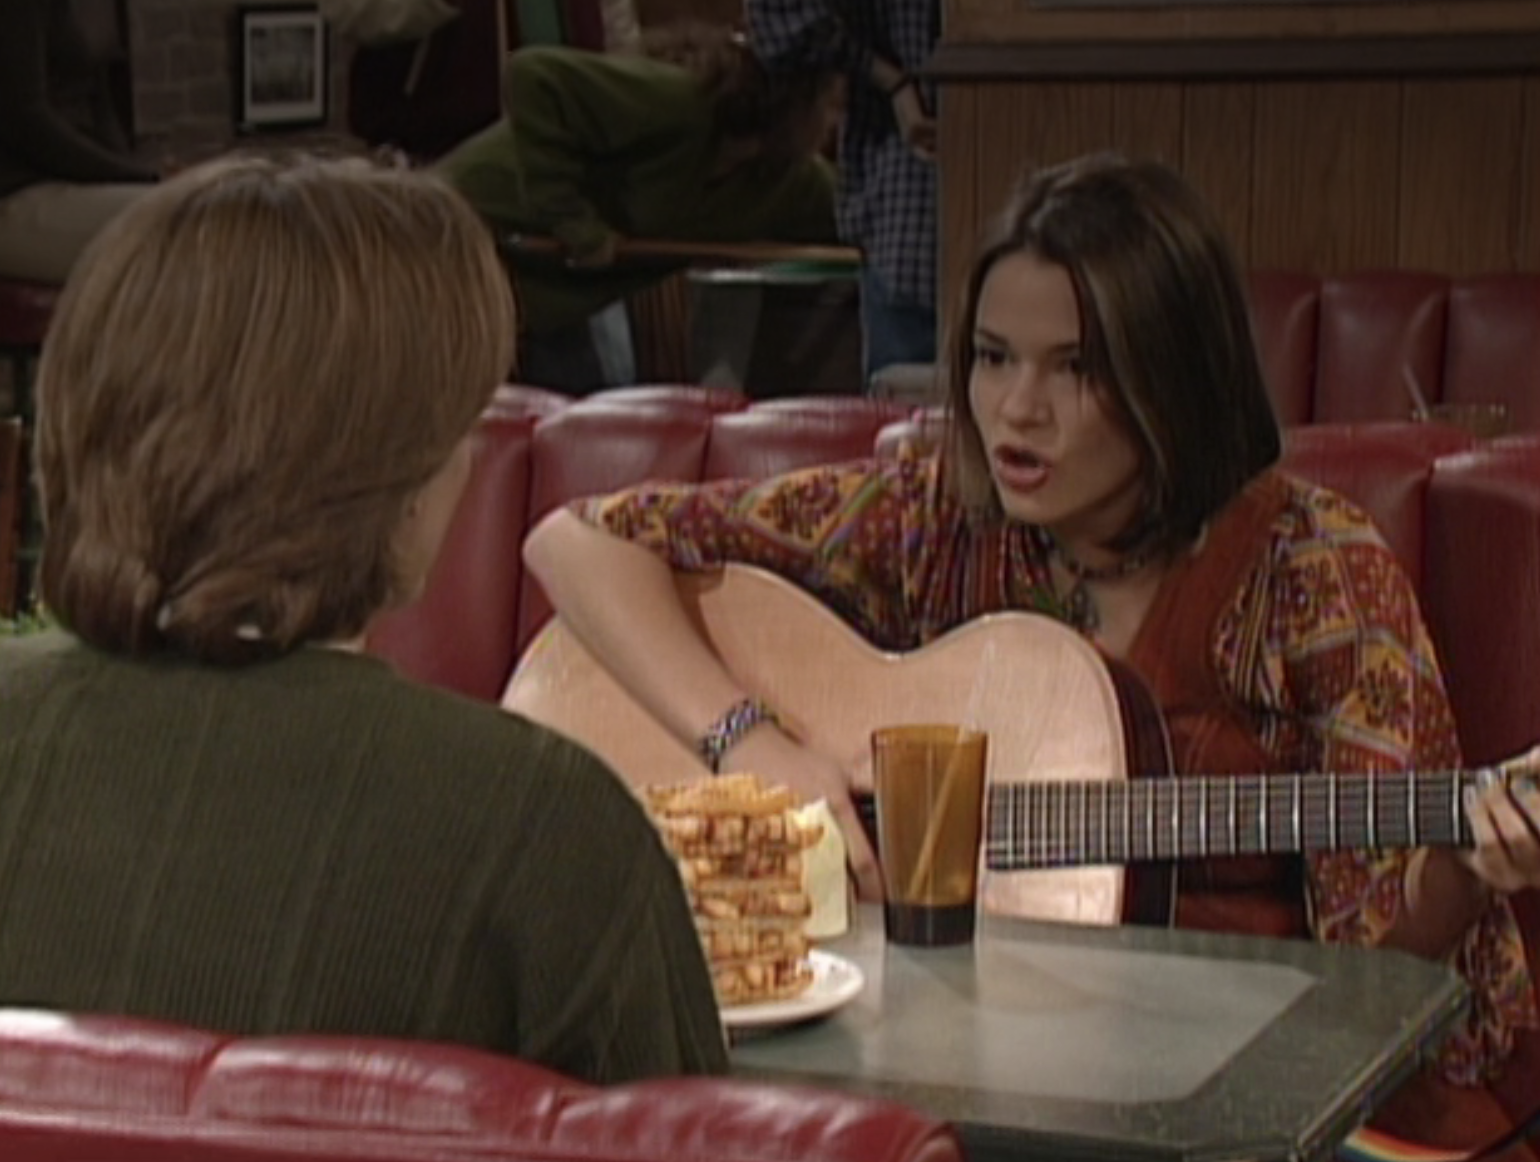 Leisha Hailey playing guitar and singing during her boy meets world appearance